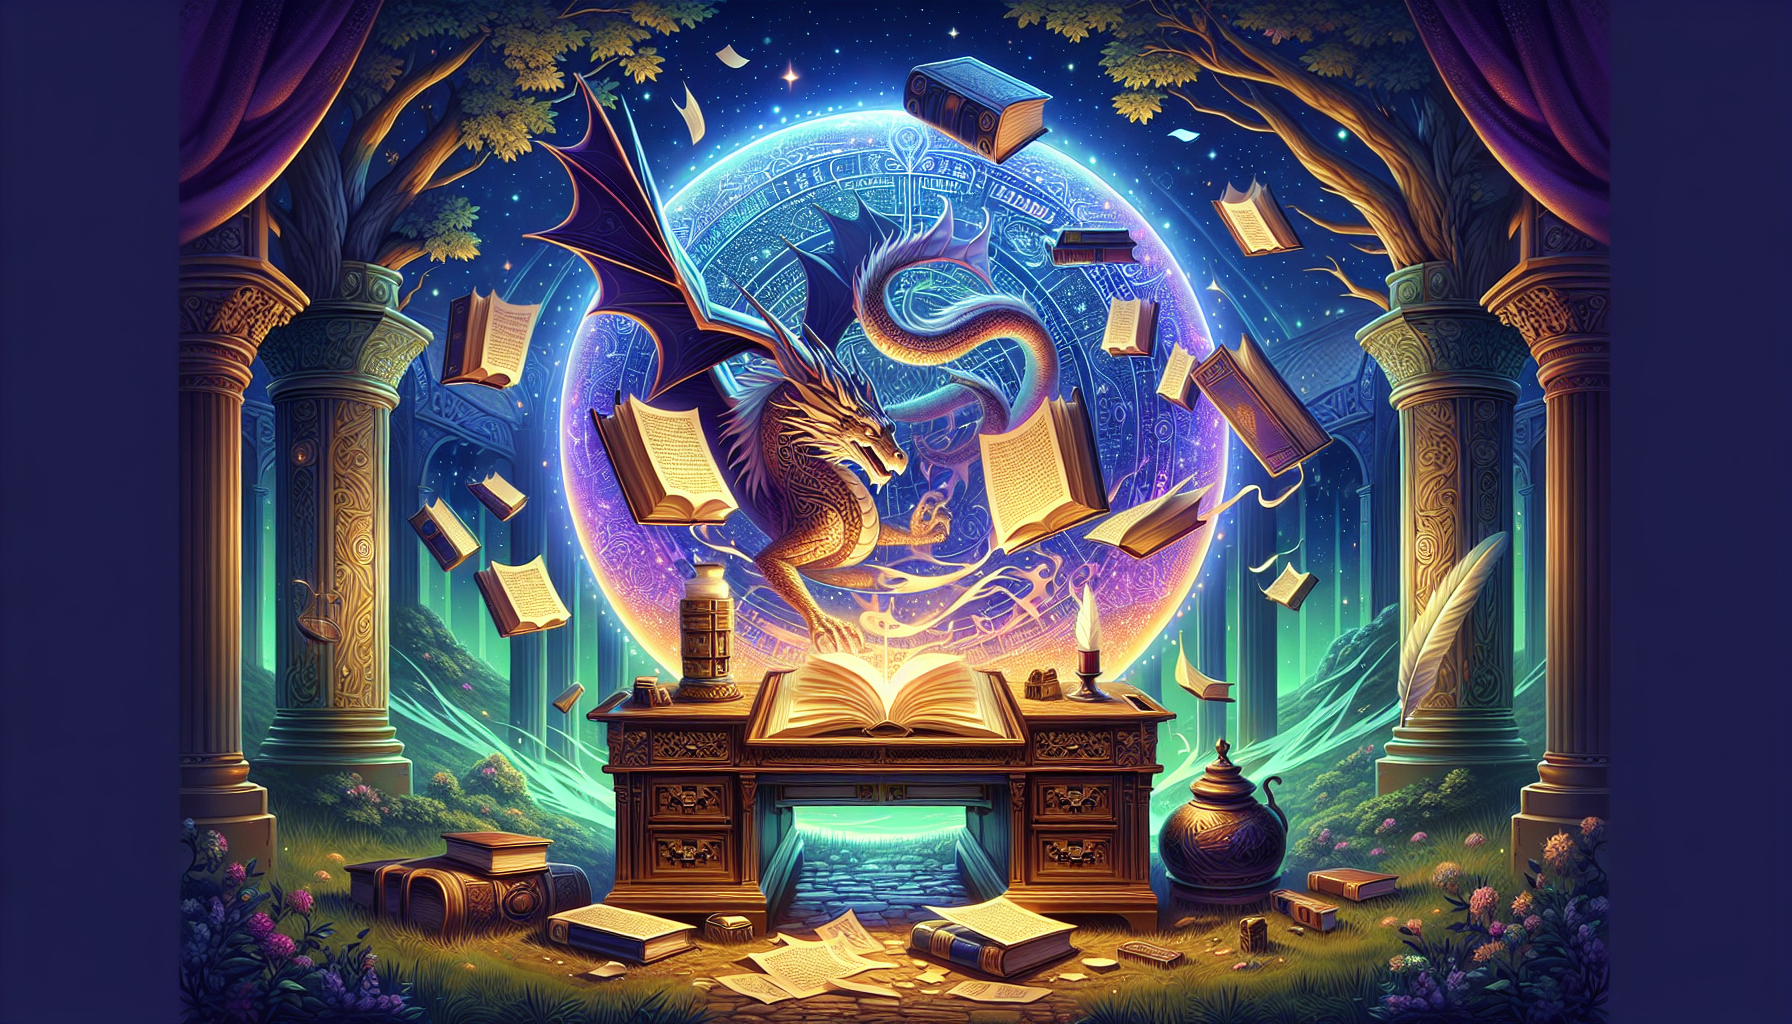 A mystical library with floating books and scrolls, an ancient oak desk with a glowing quill and inkpot, and a dragon curled around a giant crystal ball illuminating a detailed script, all set in an e